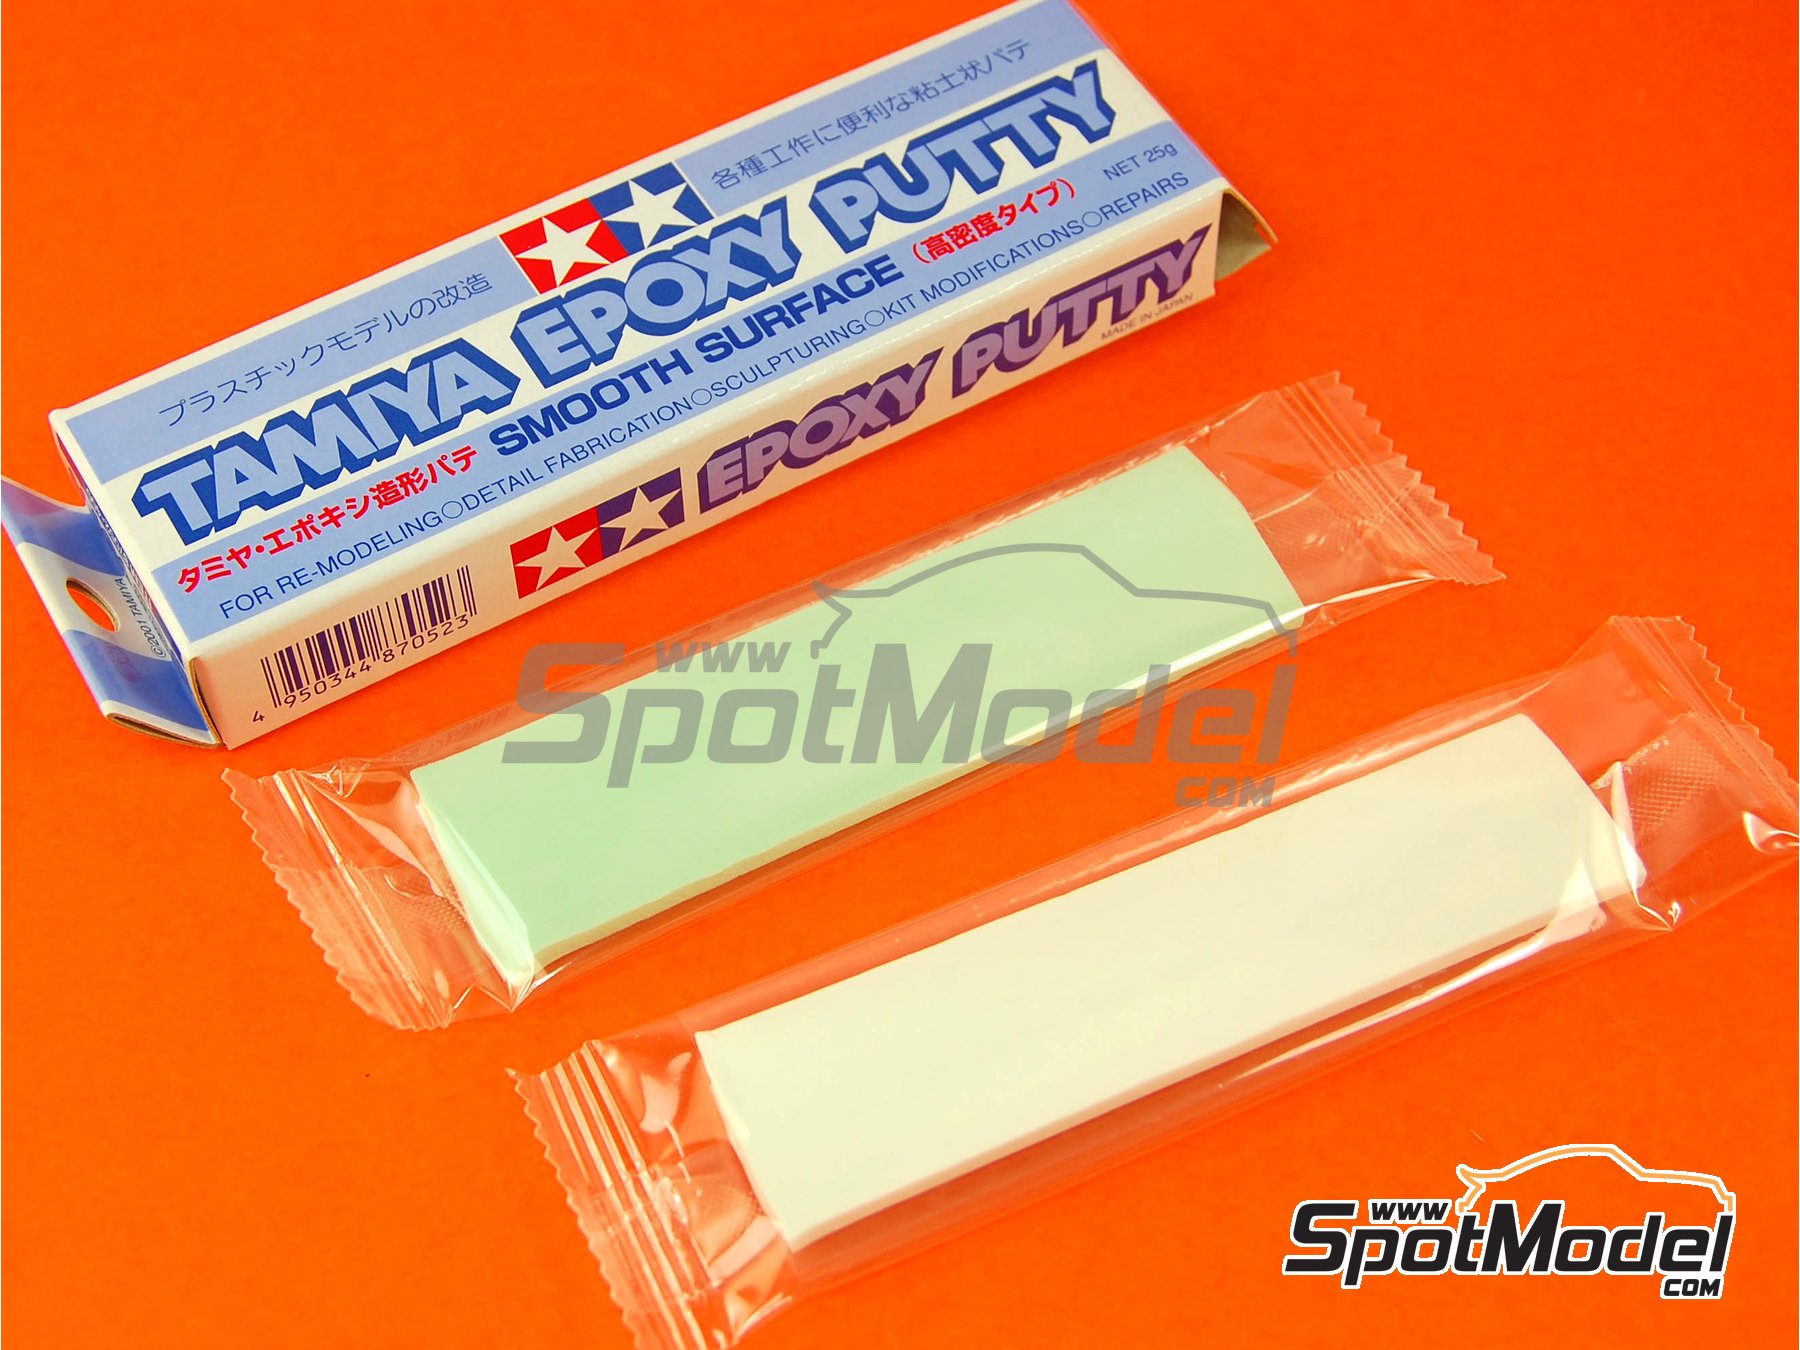 Tamiya 2 part epoxy putty - Model Building Questions and Answers